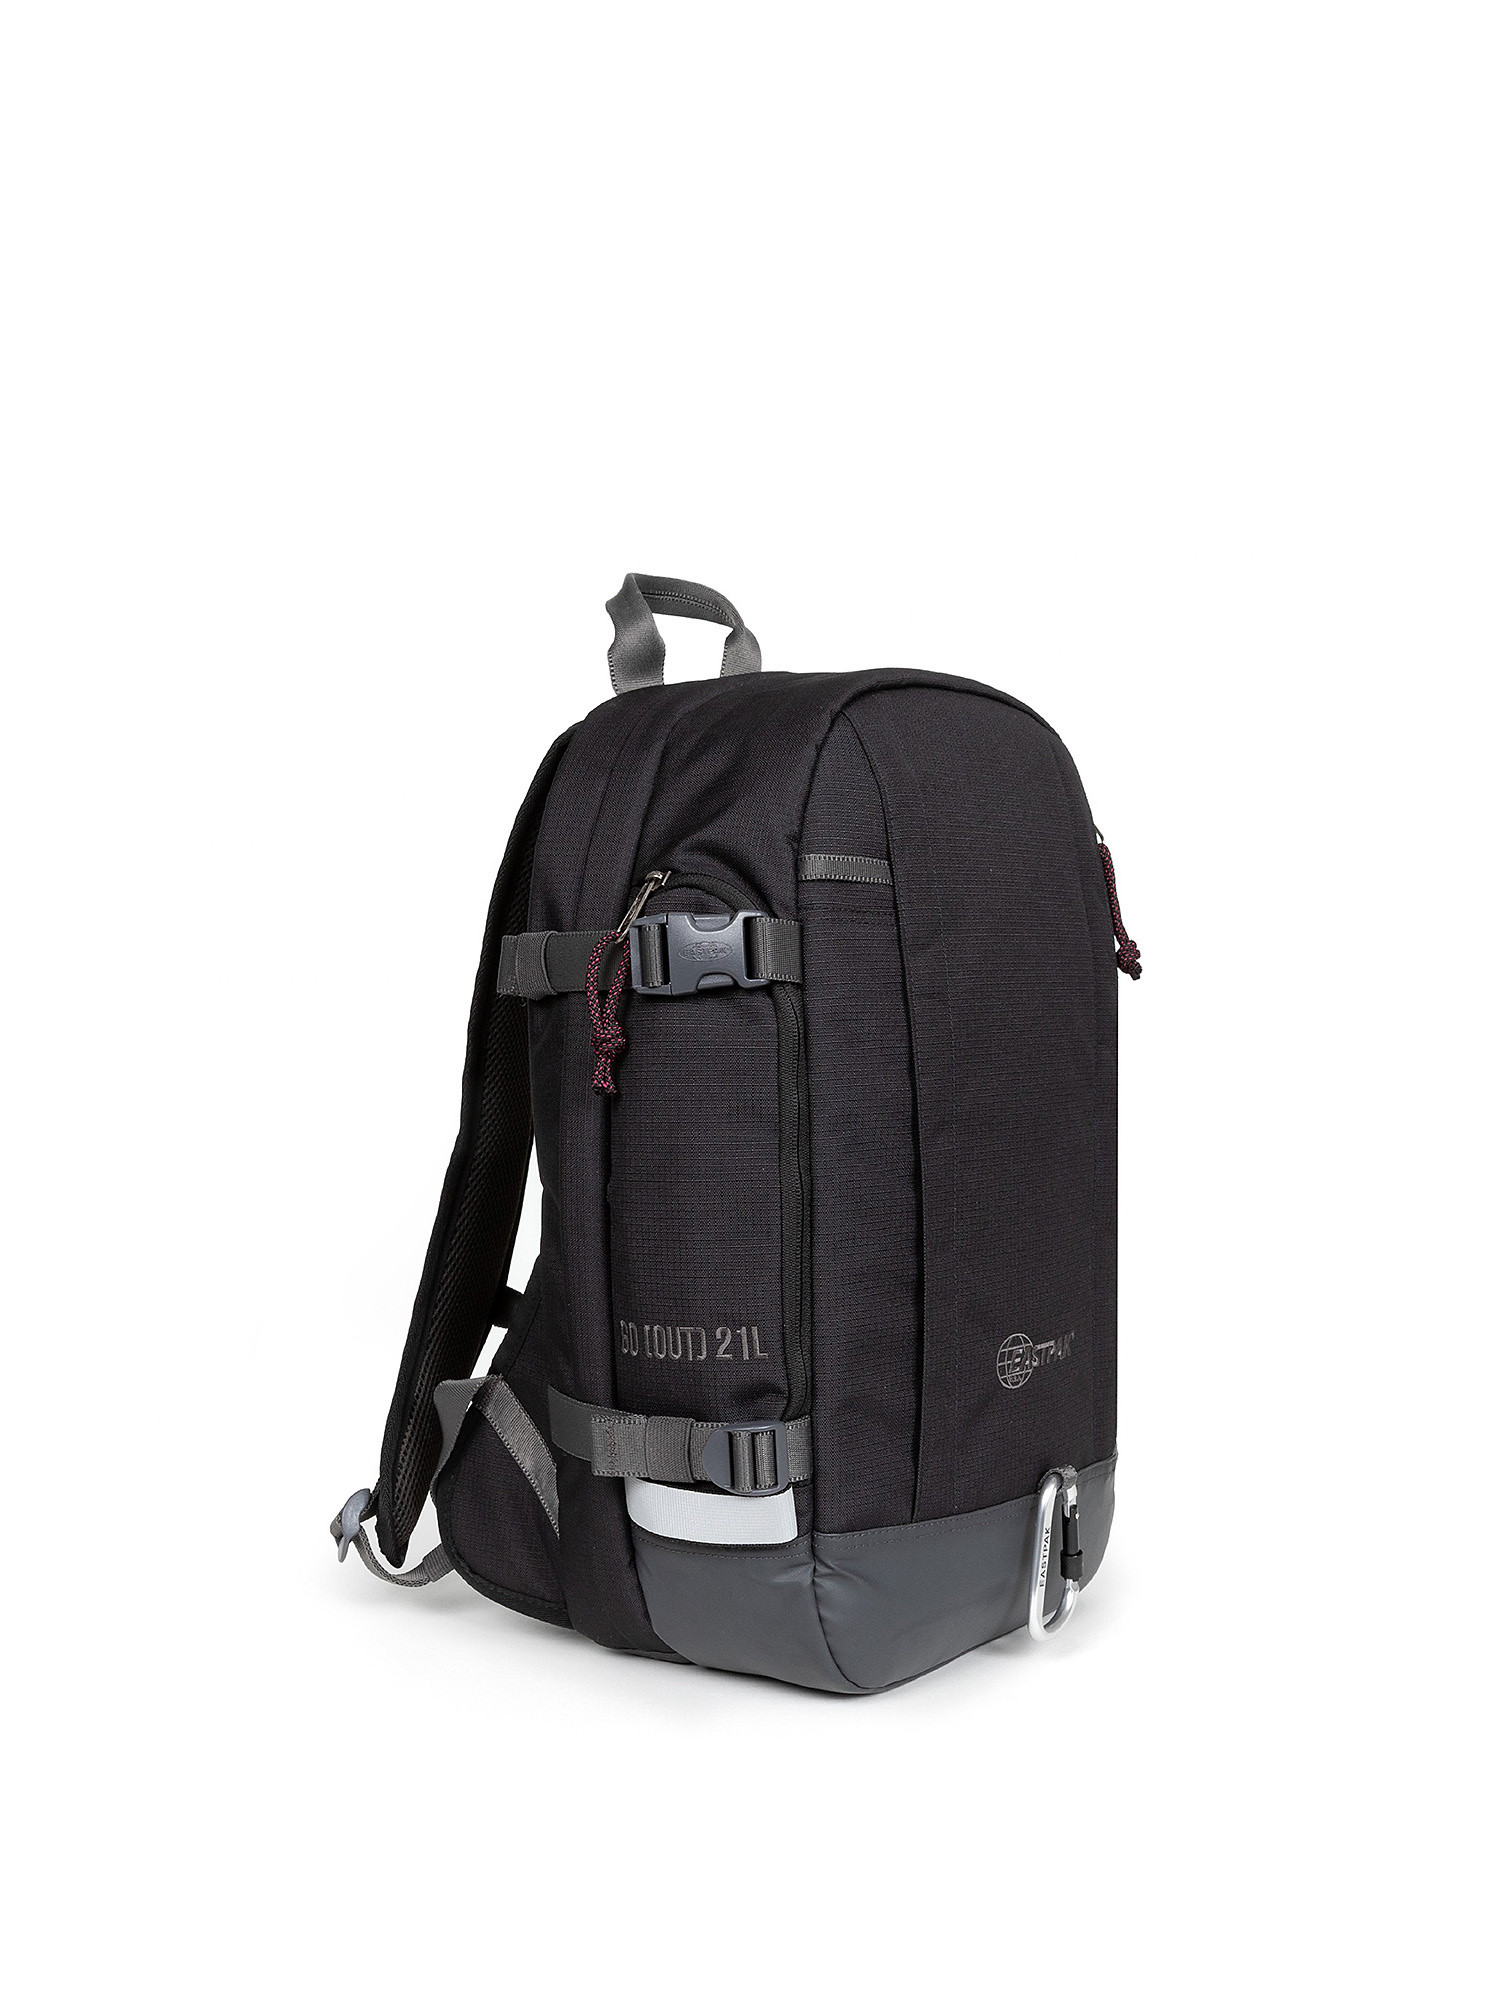 Eastpak - Zaino Out Safepack Out Black, Nero, large image number 2